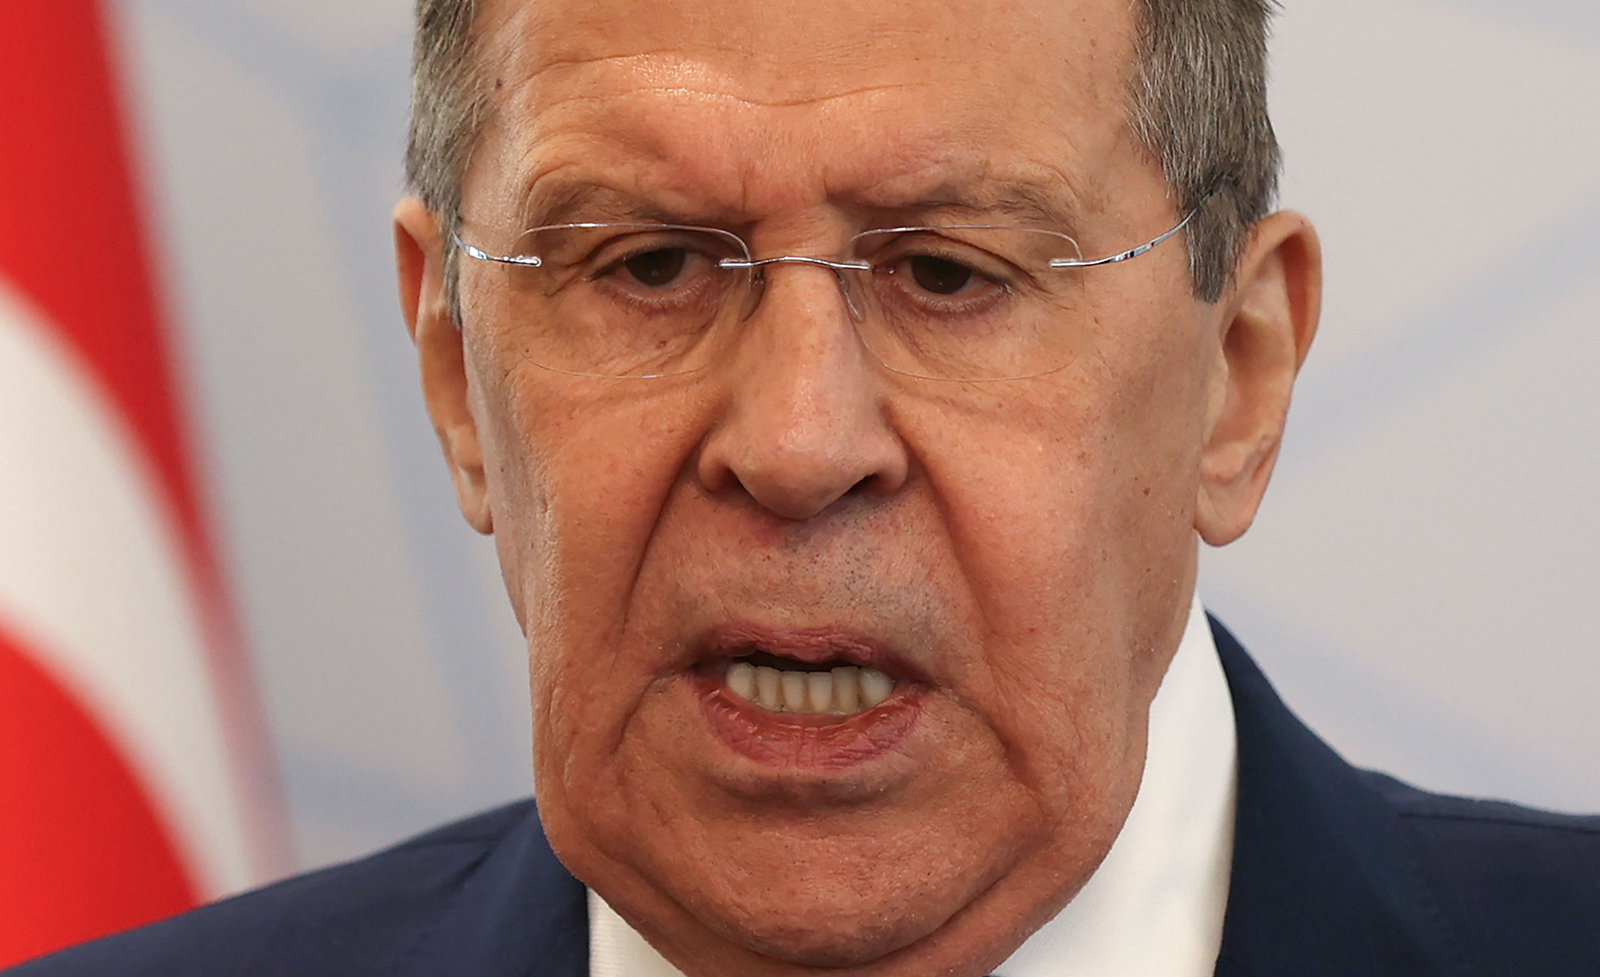 Russian Foreign Minister Sergei Lavrov attends a news conference after meeting with Turkish Foreign Minister Mevlut Cavusoglu, in Ankara, on June 8.